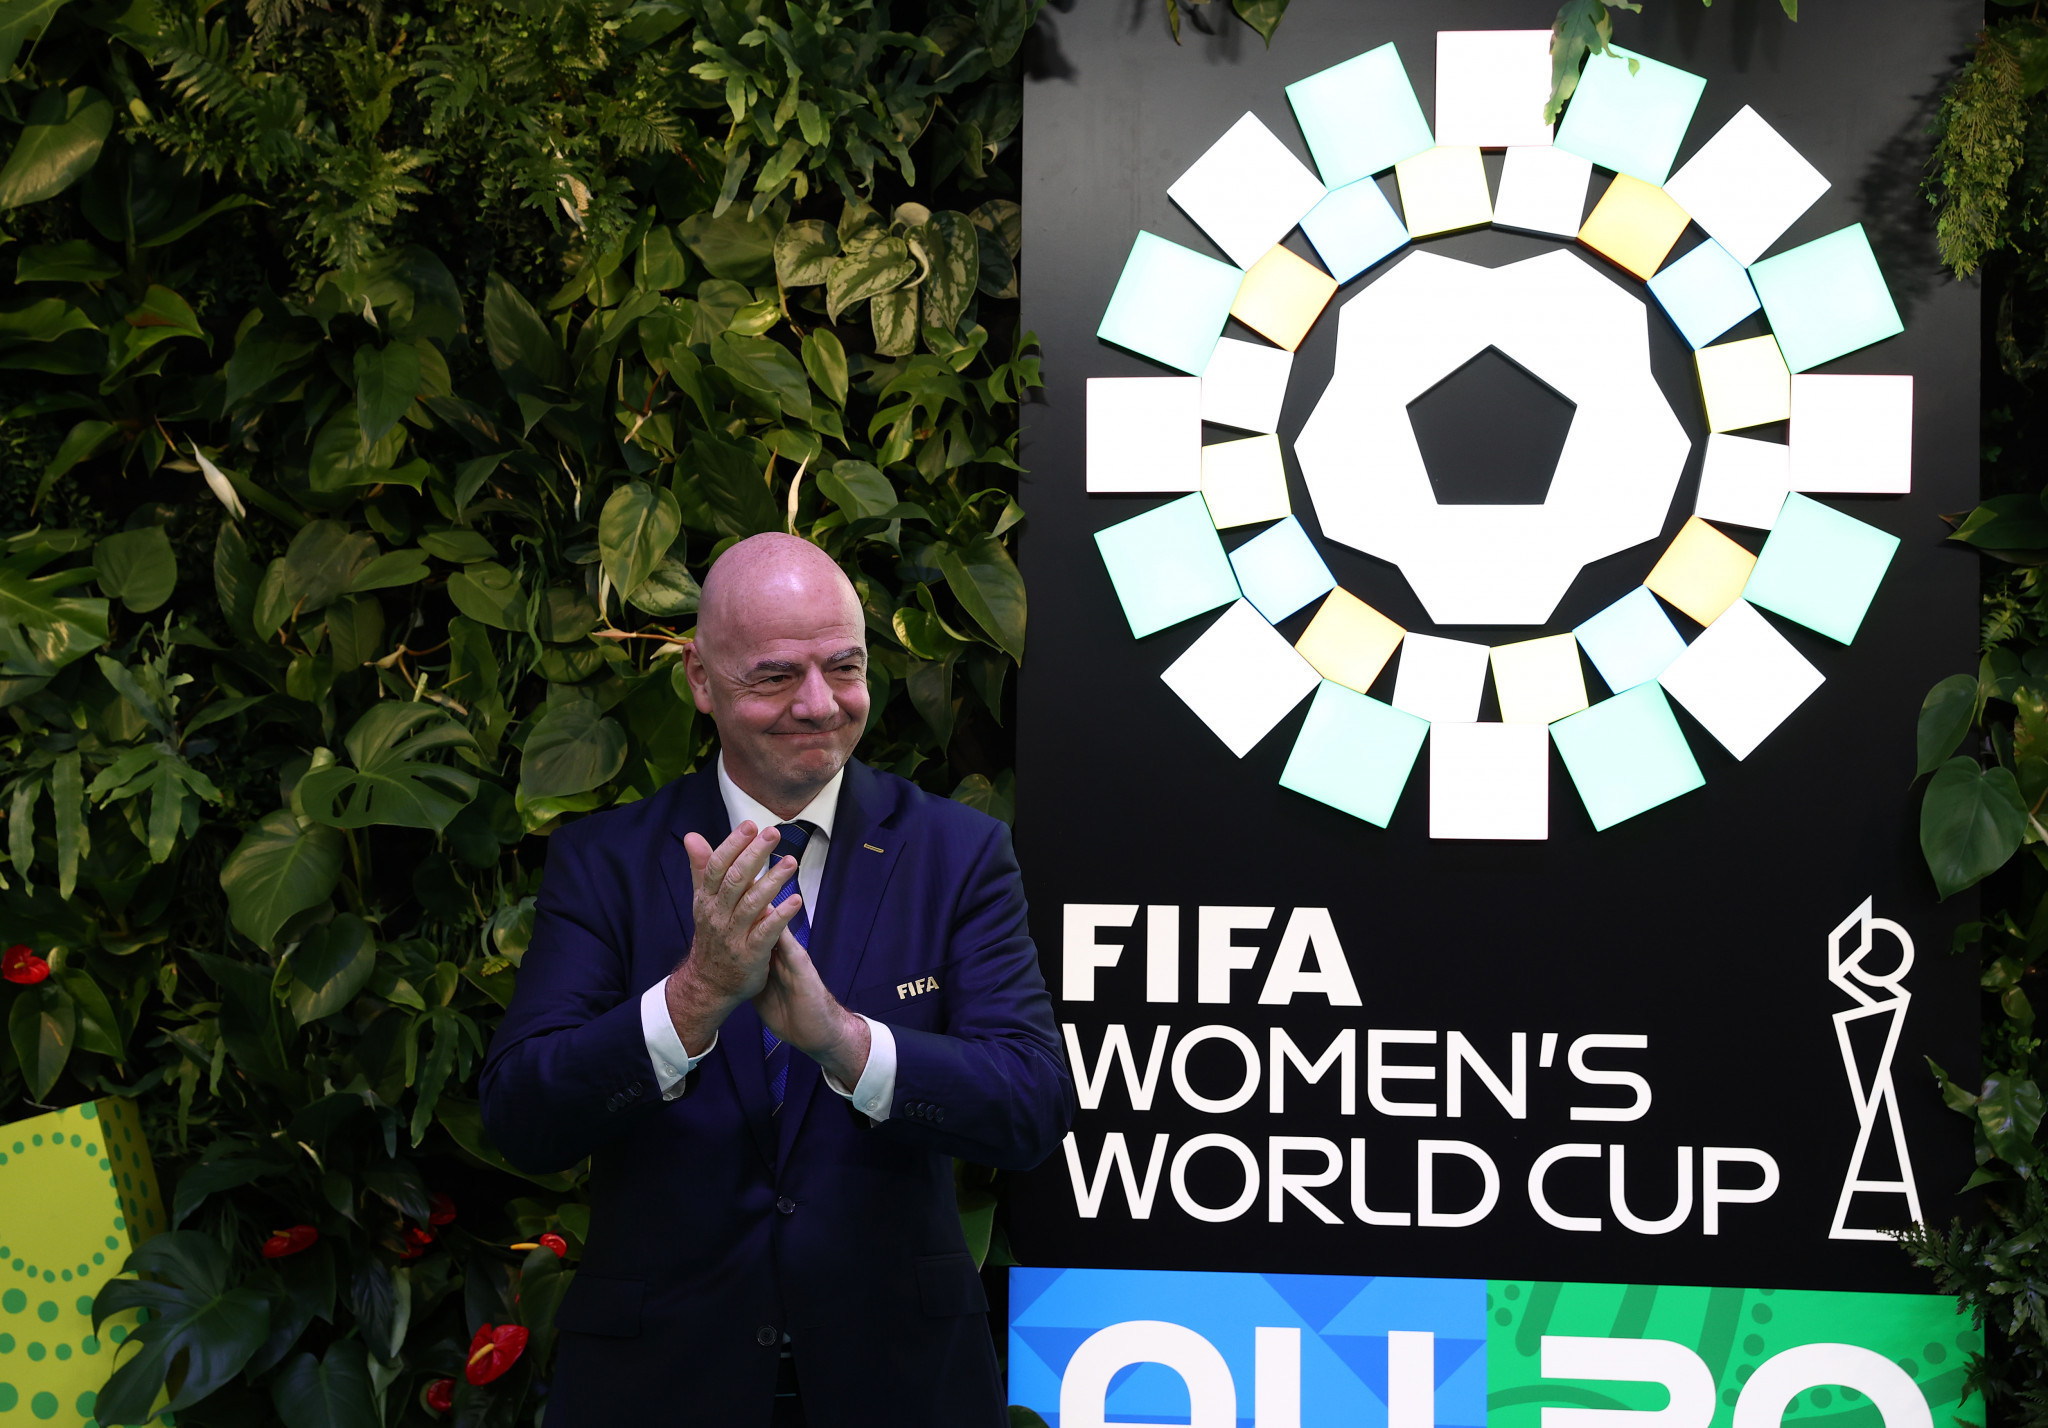  FIFA $100 million short of goal for 2023 Women’s World Cup broadcast rights fees